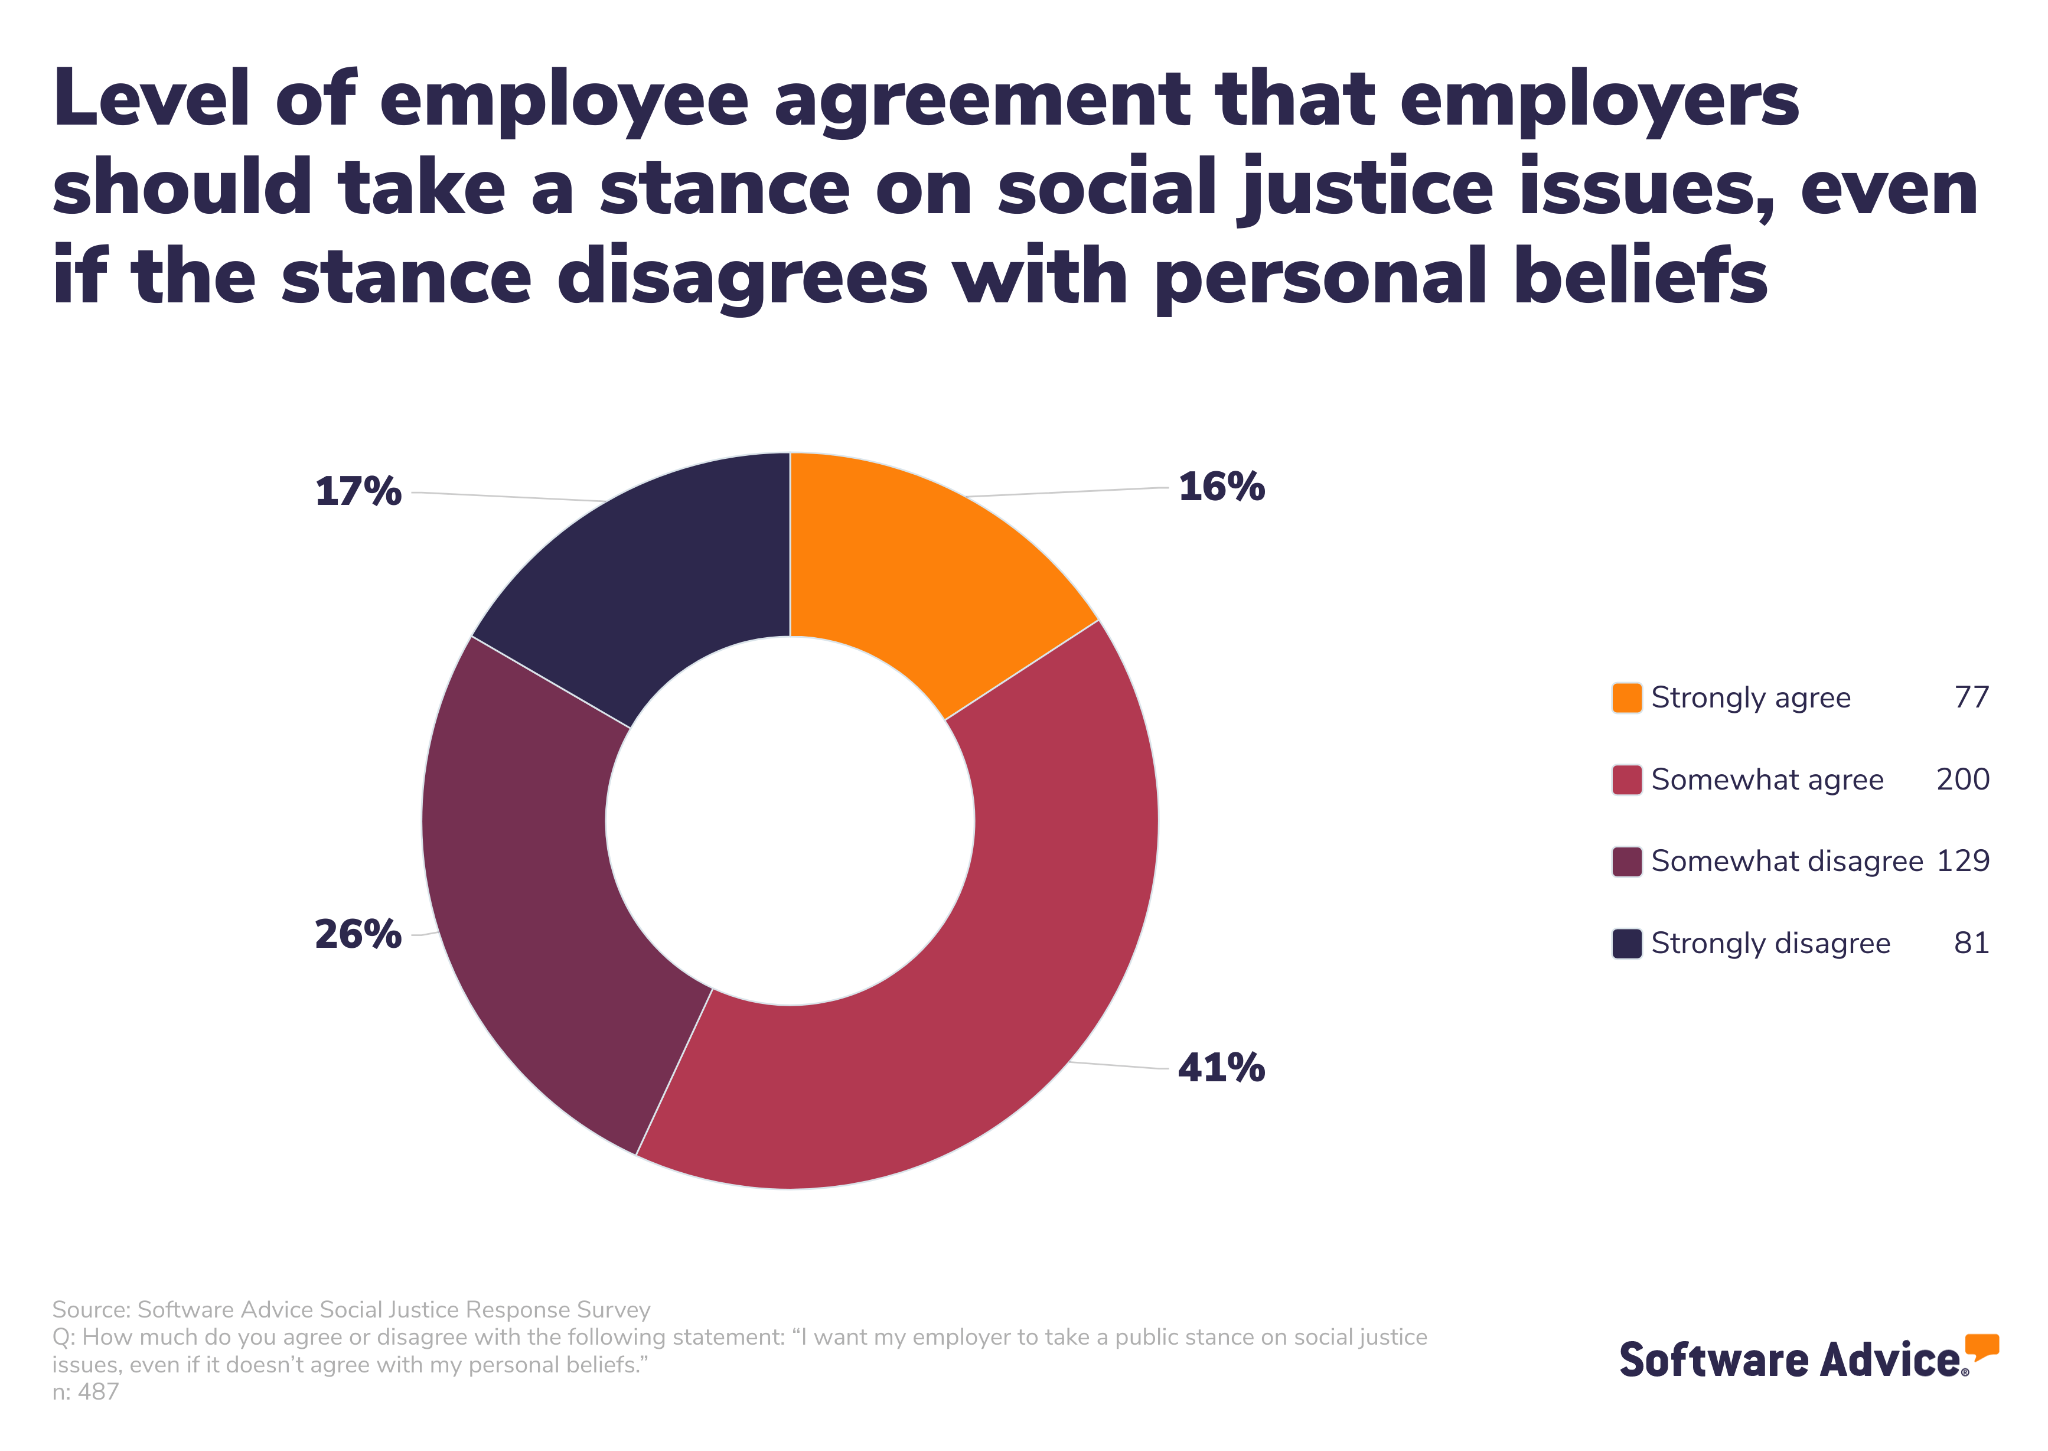 Level of employee agreement that employees should take a stance on social justice issues, even if the stance disagrees with personal beliefs. 